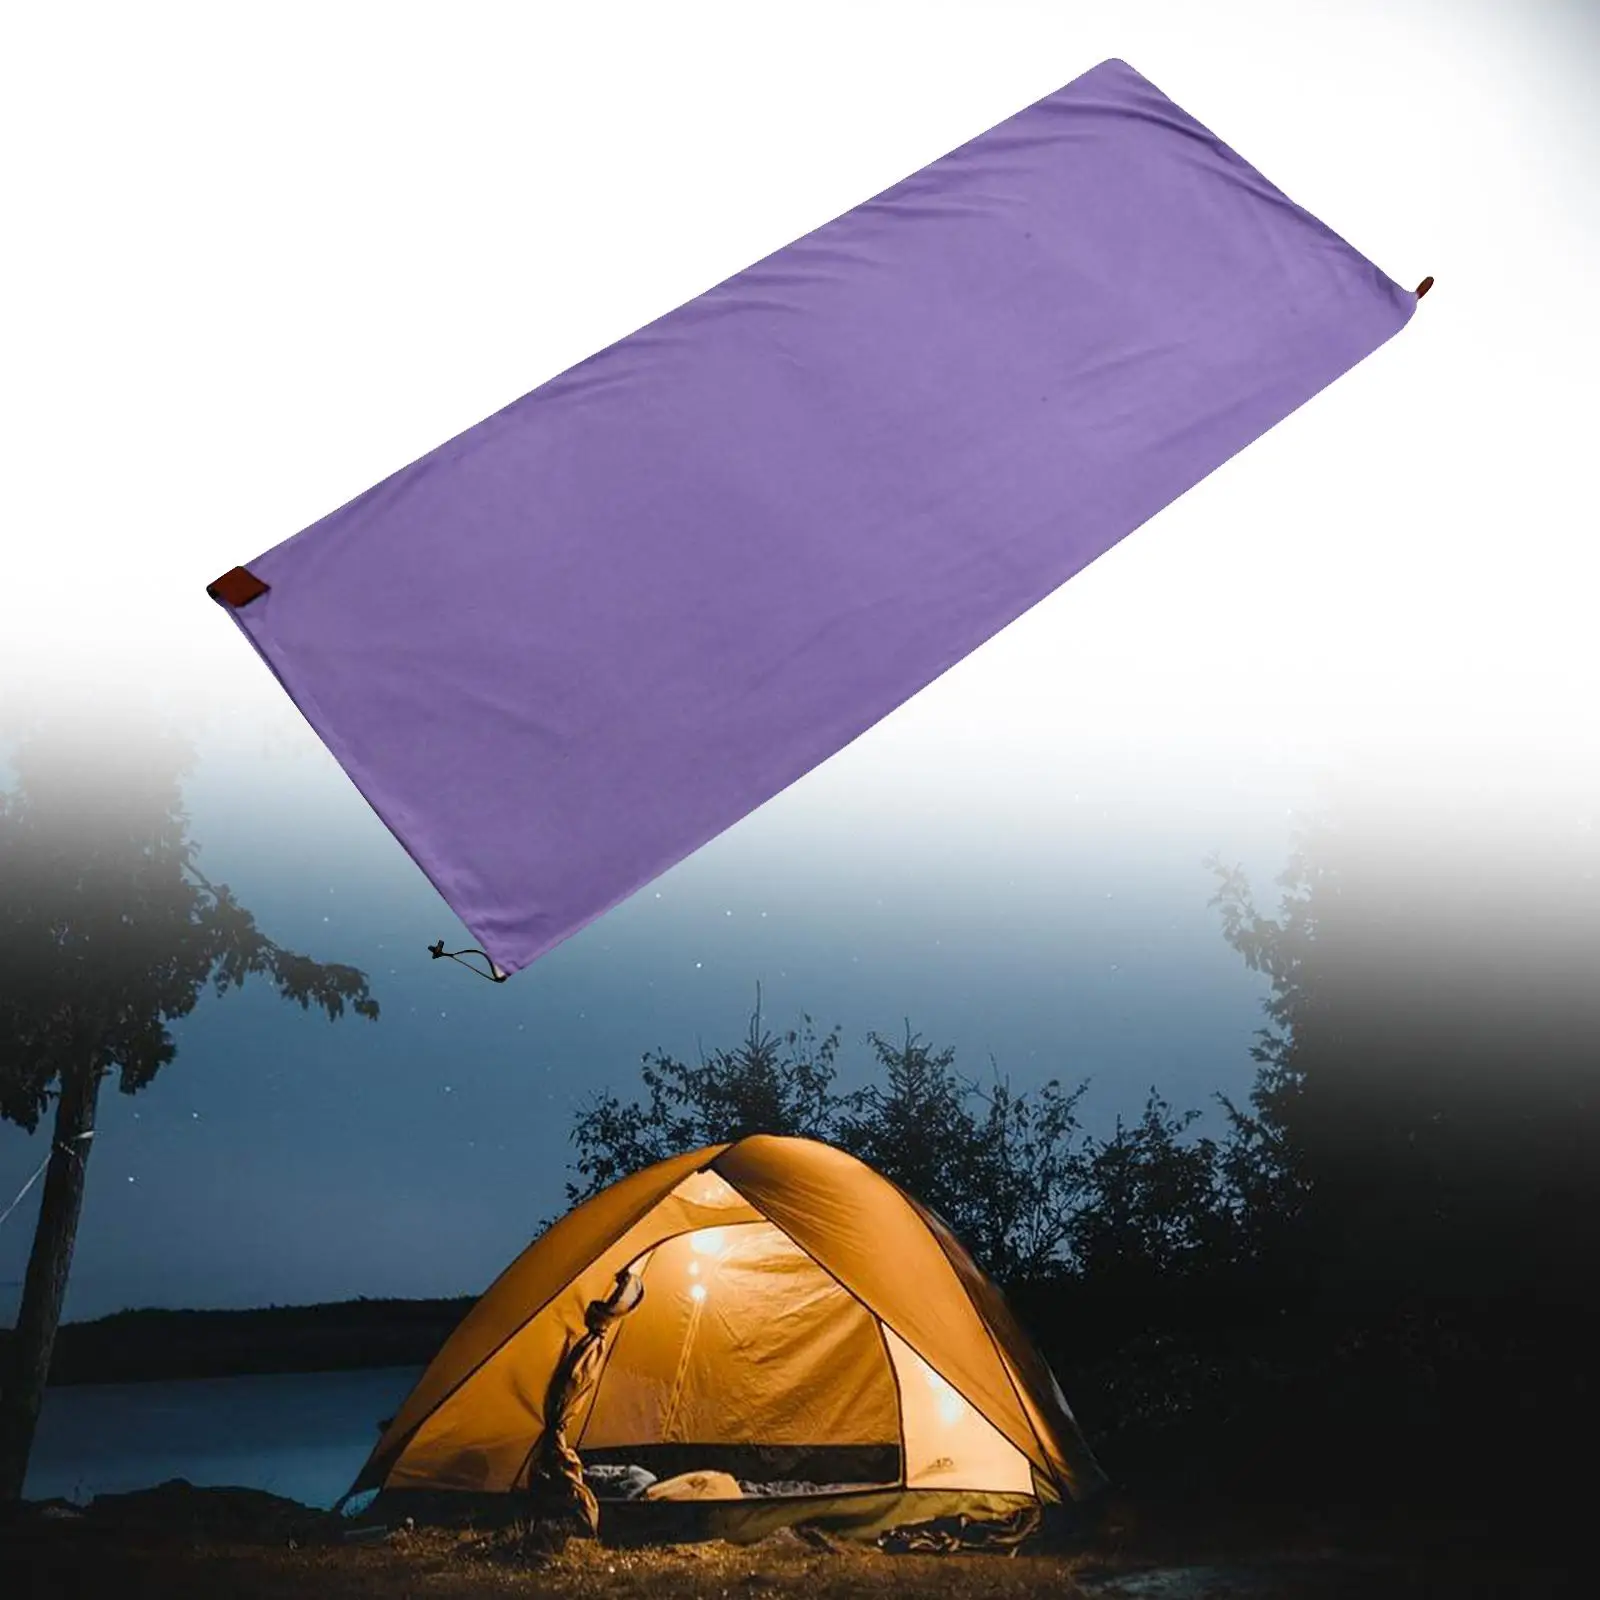 Sleeping Bag Liner Polar Fleece Camping Blanket for Traveling, Camping Accessories Practical Comfortable Unfold Size 71x31.5inch